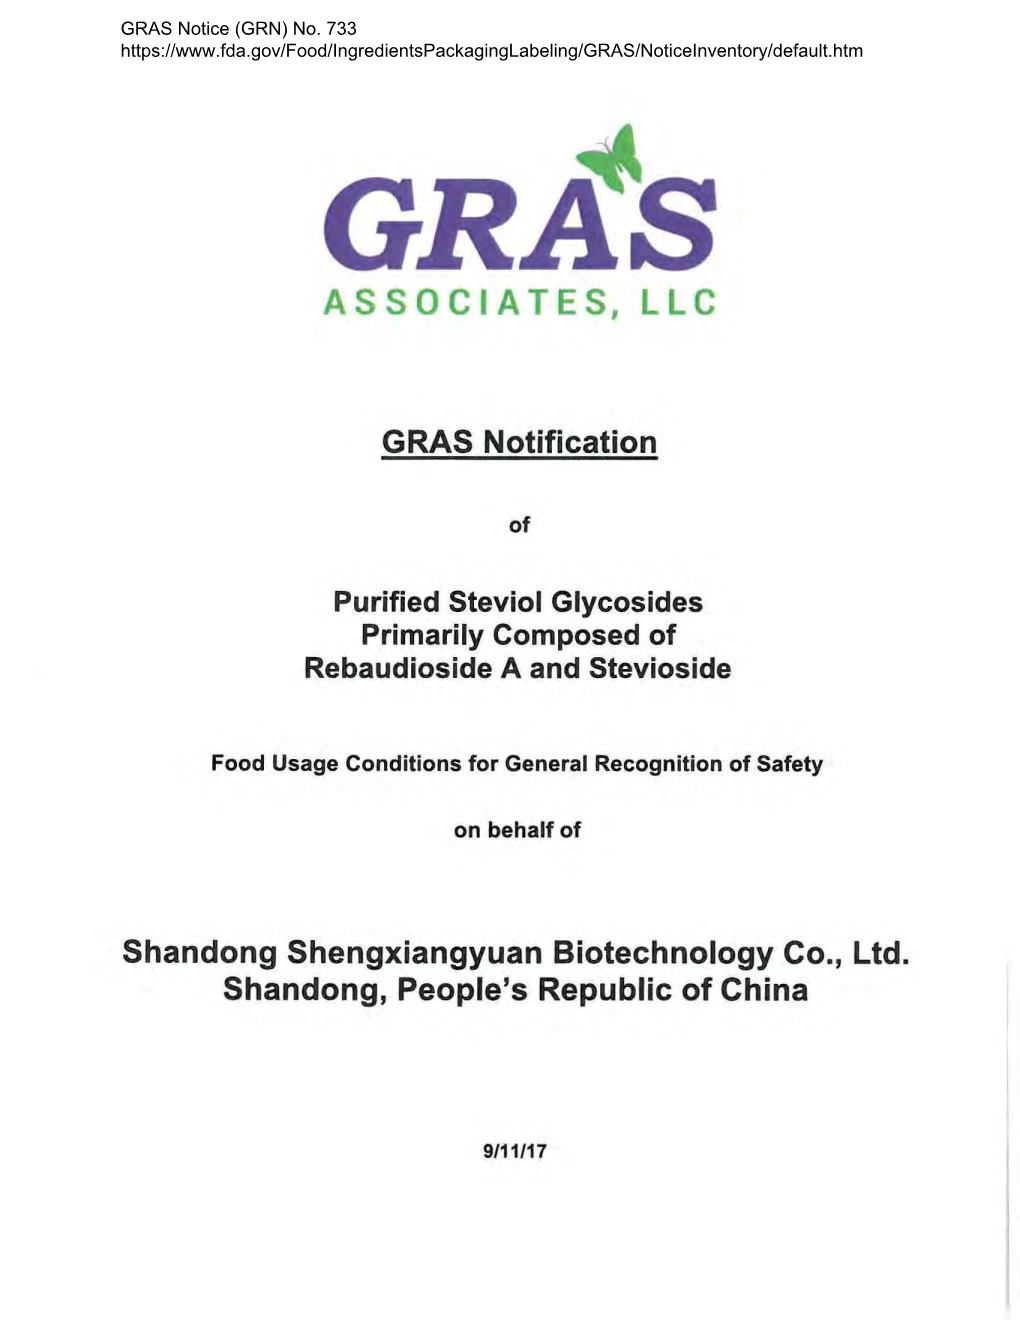 GRAS Notice 733 for Purified Steviol Glycosides Part 1